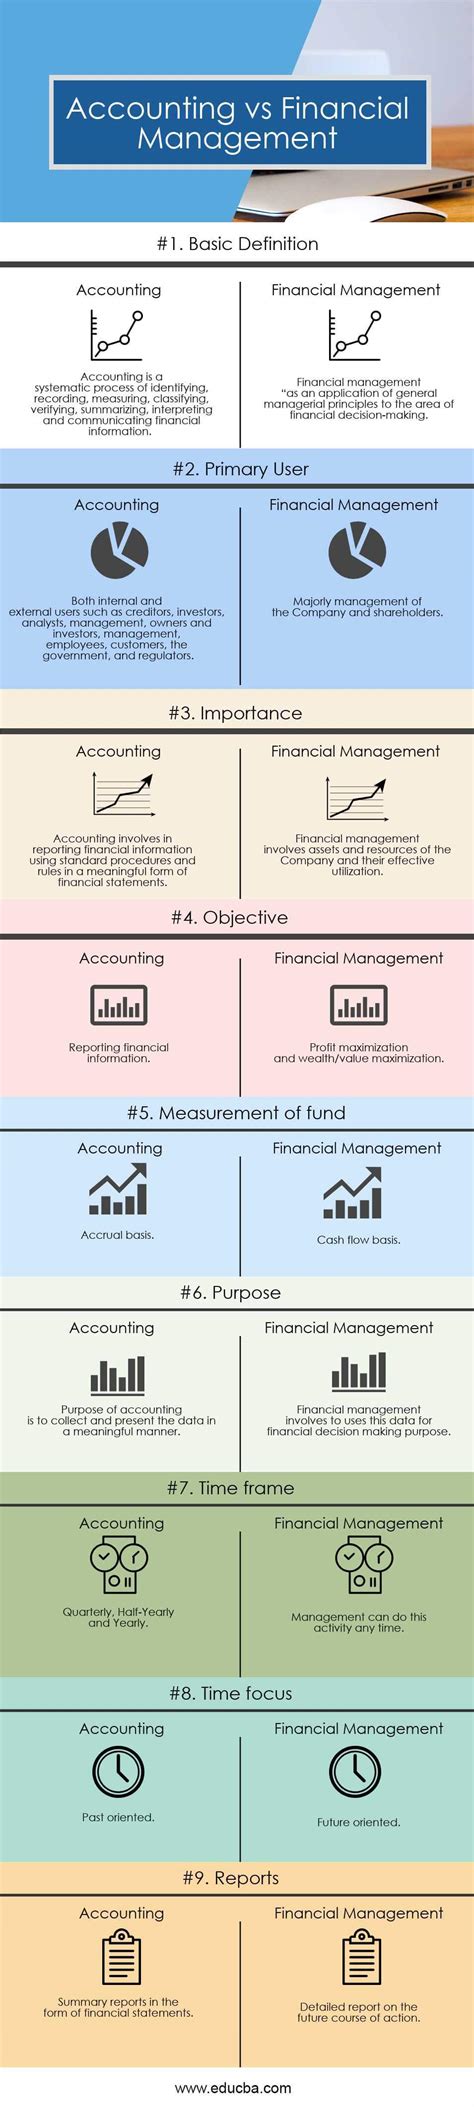 If managerial accounting is created for a company's management, financial managerial accounting is the practice of analyzing and communicating financial data to managers, who use the cost accounting is a form of managerial accounting that aims to capture a company's total cost of. Accounting vs Financial Management | Top 9 Differences ...